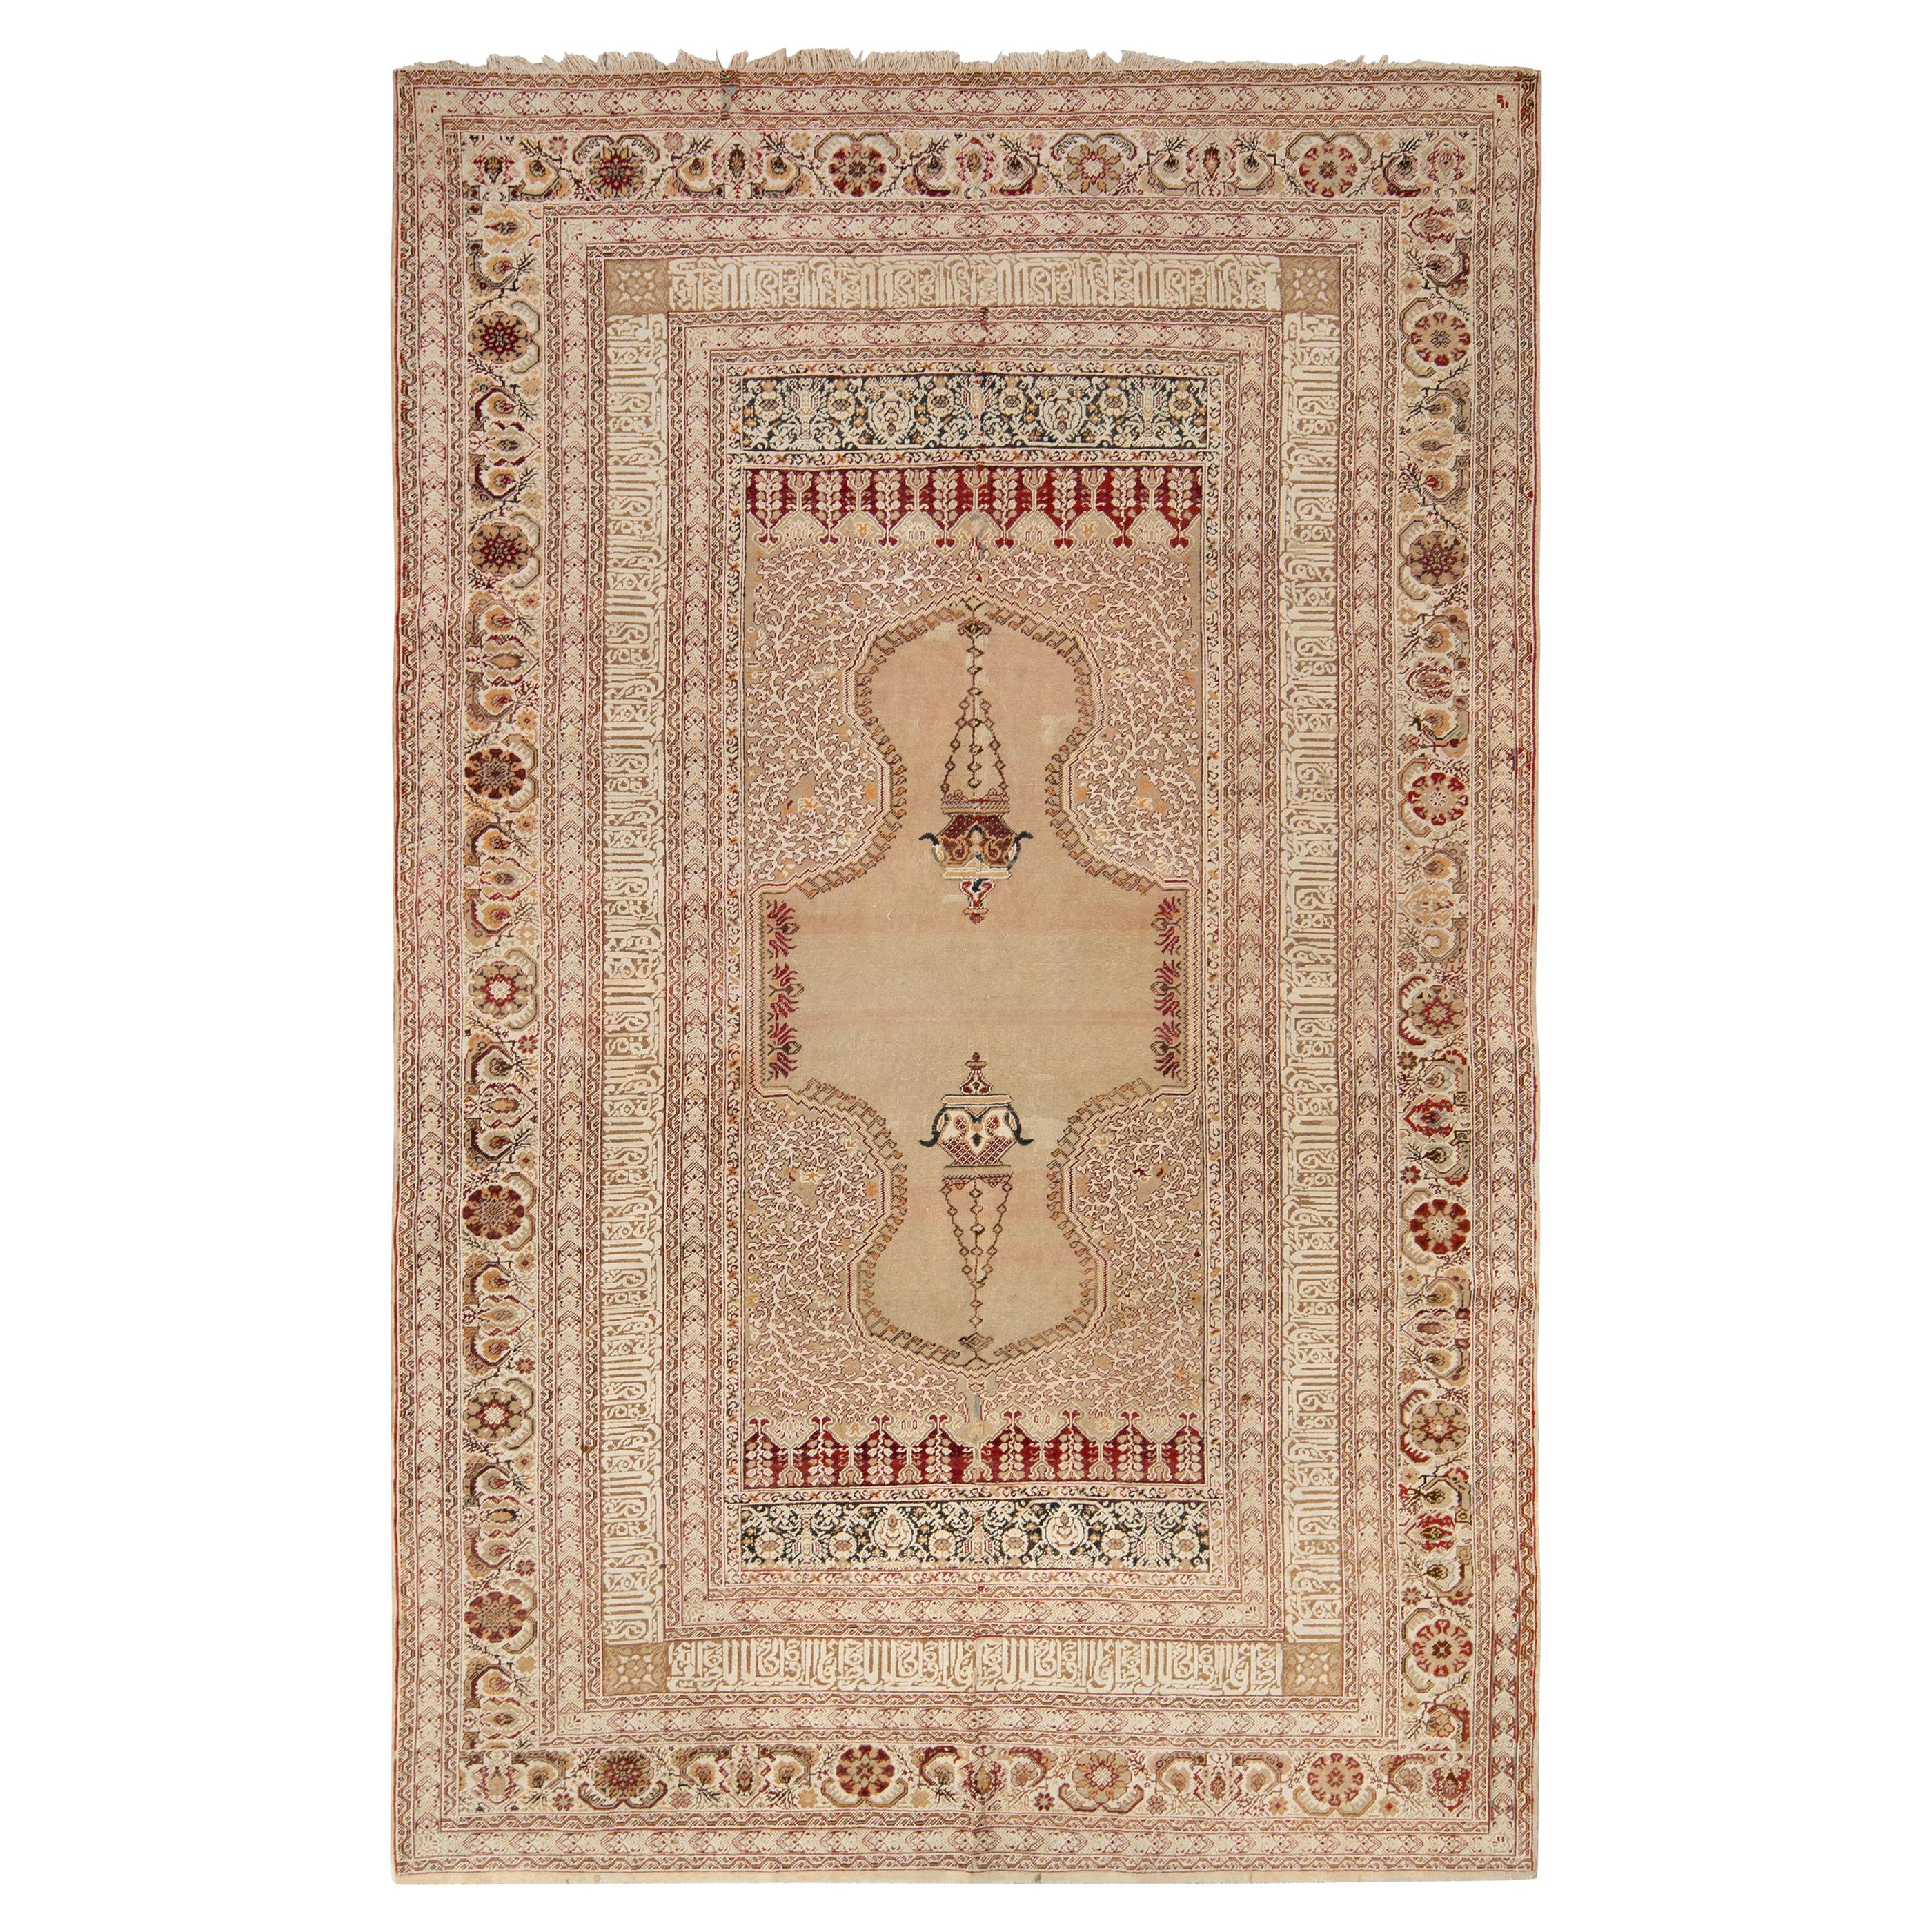 Hand-Knotted Antique Ghiordes Rug in Beige-Brown Floral Pattern by Rug & Kilim